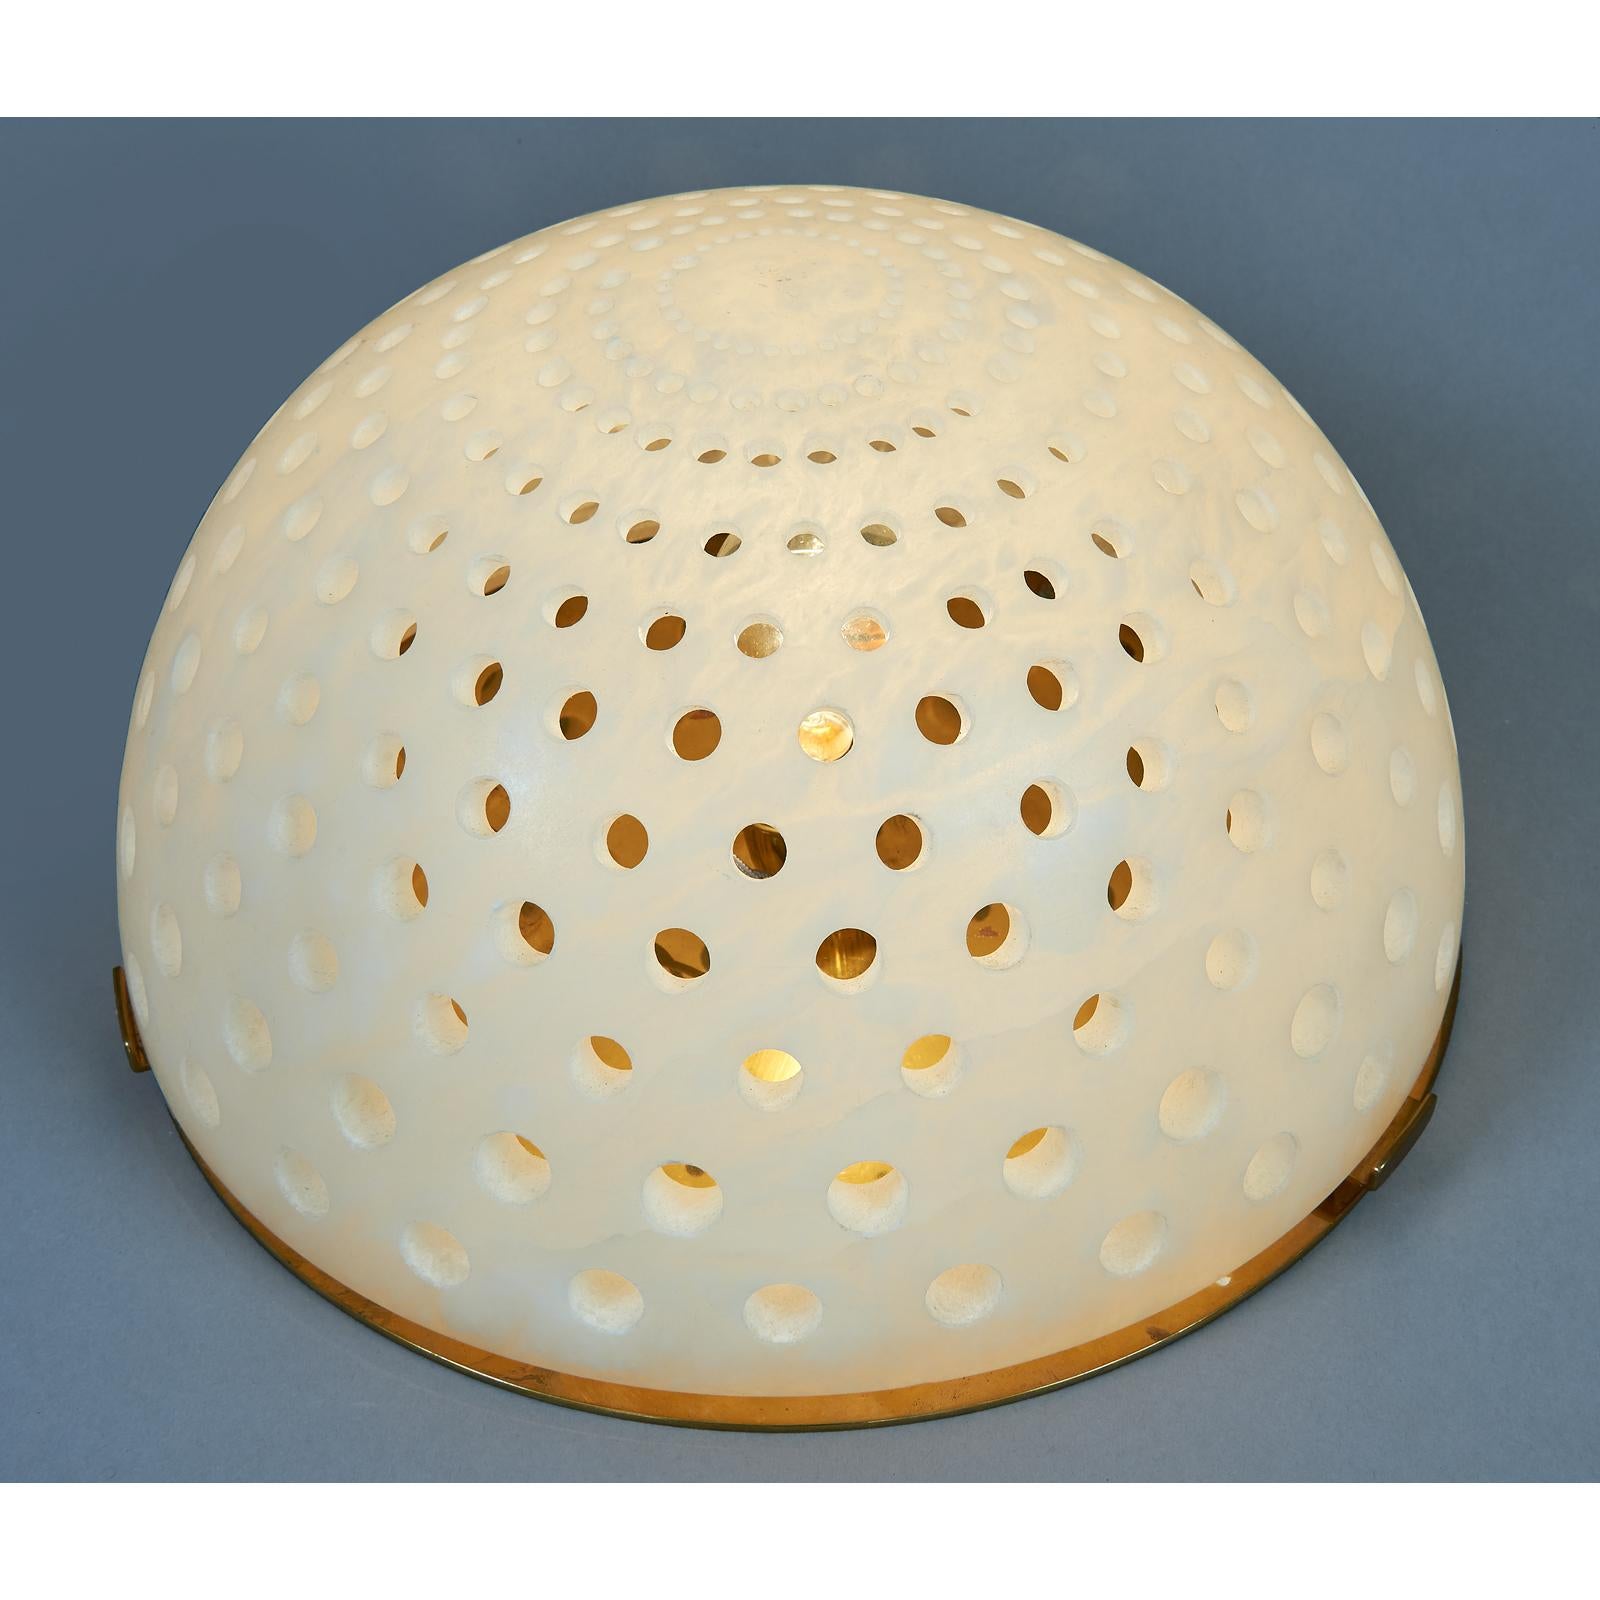 Angelo Mangiarotti ( 1921-2012)
A wonderful alabaster table lamp, with a decorative rhythmic pattern of perforations throughout the dome which create a soft and tempered light.
Italy, circa 1980.
Dimensions: 16 diameter x 9 height.
 